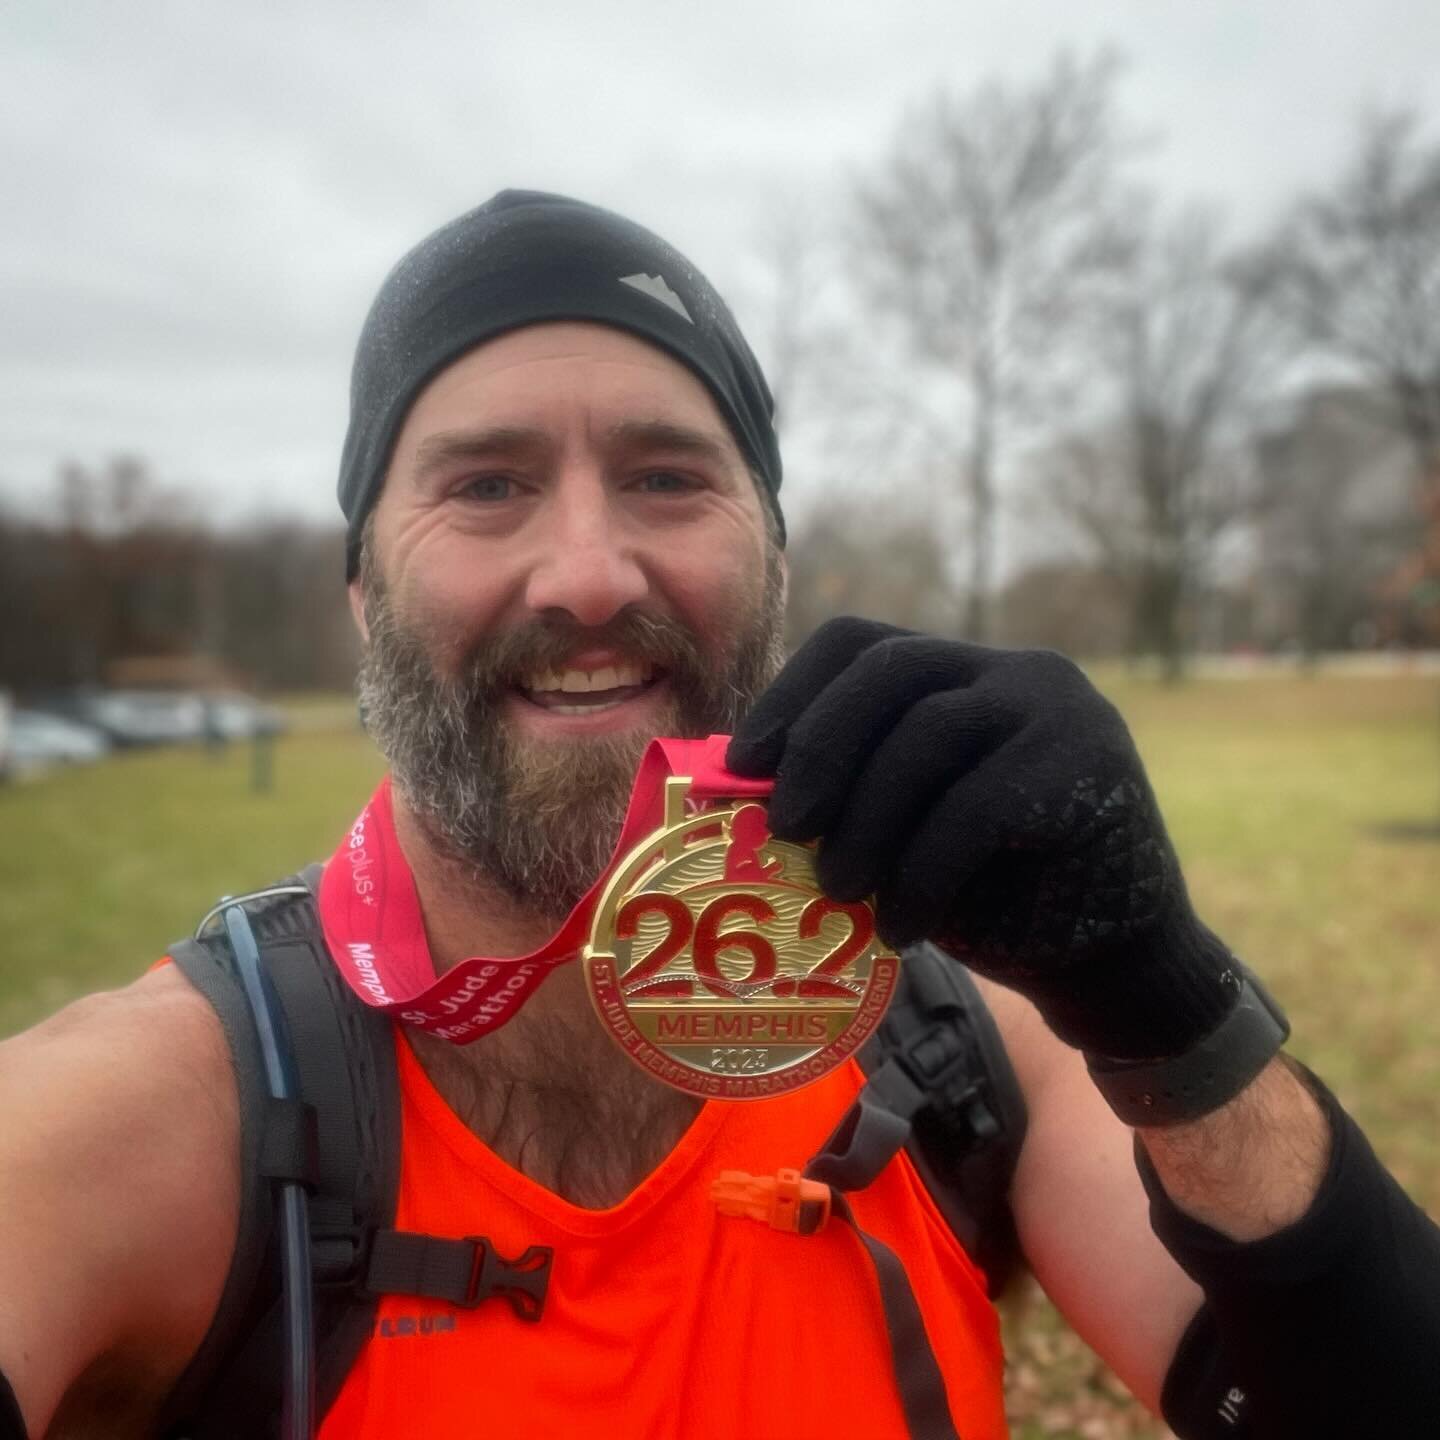 2nd full marathon in the books today with a new PR of 4:18:03!

I ran my first marathon in May, and to say it was a disappointment would be an understatement. It was in the mid-80&rsquo;s, I ended up having to walk more than I care to admit, and it l